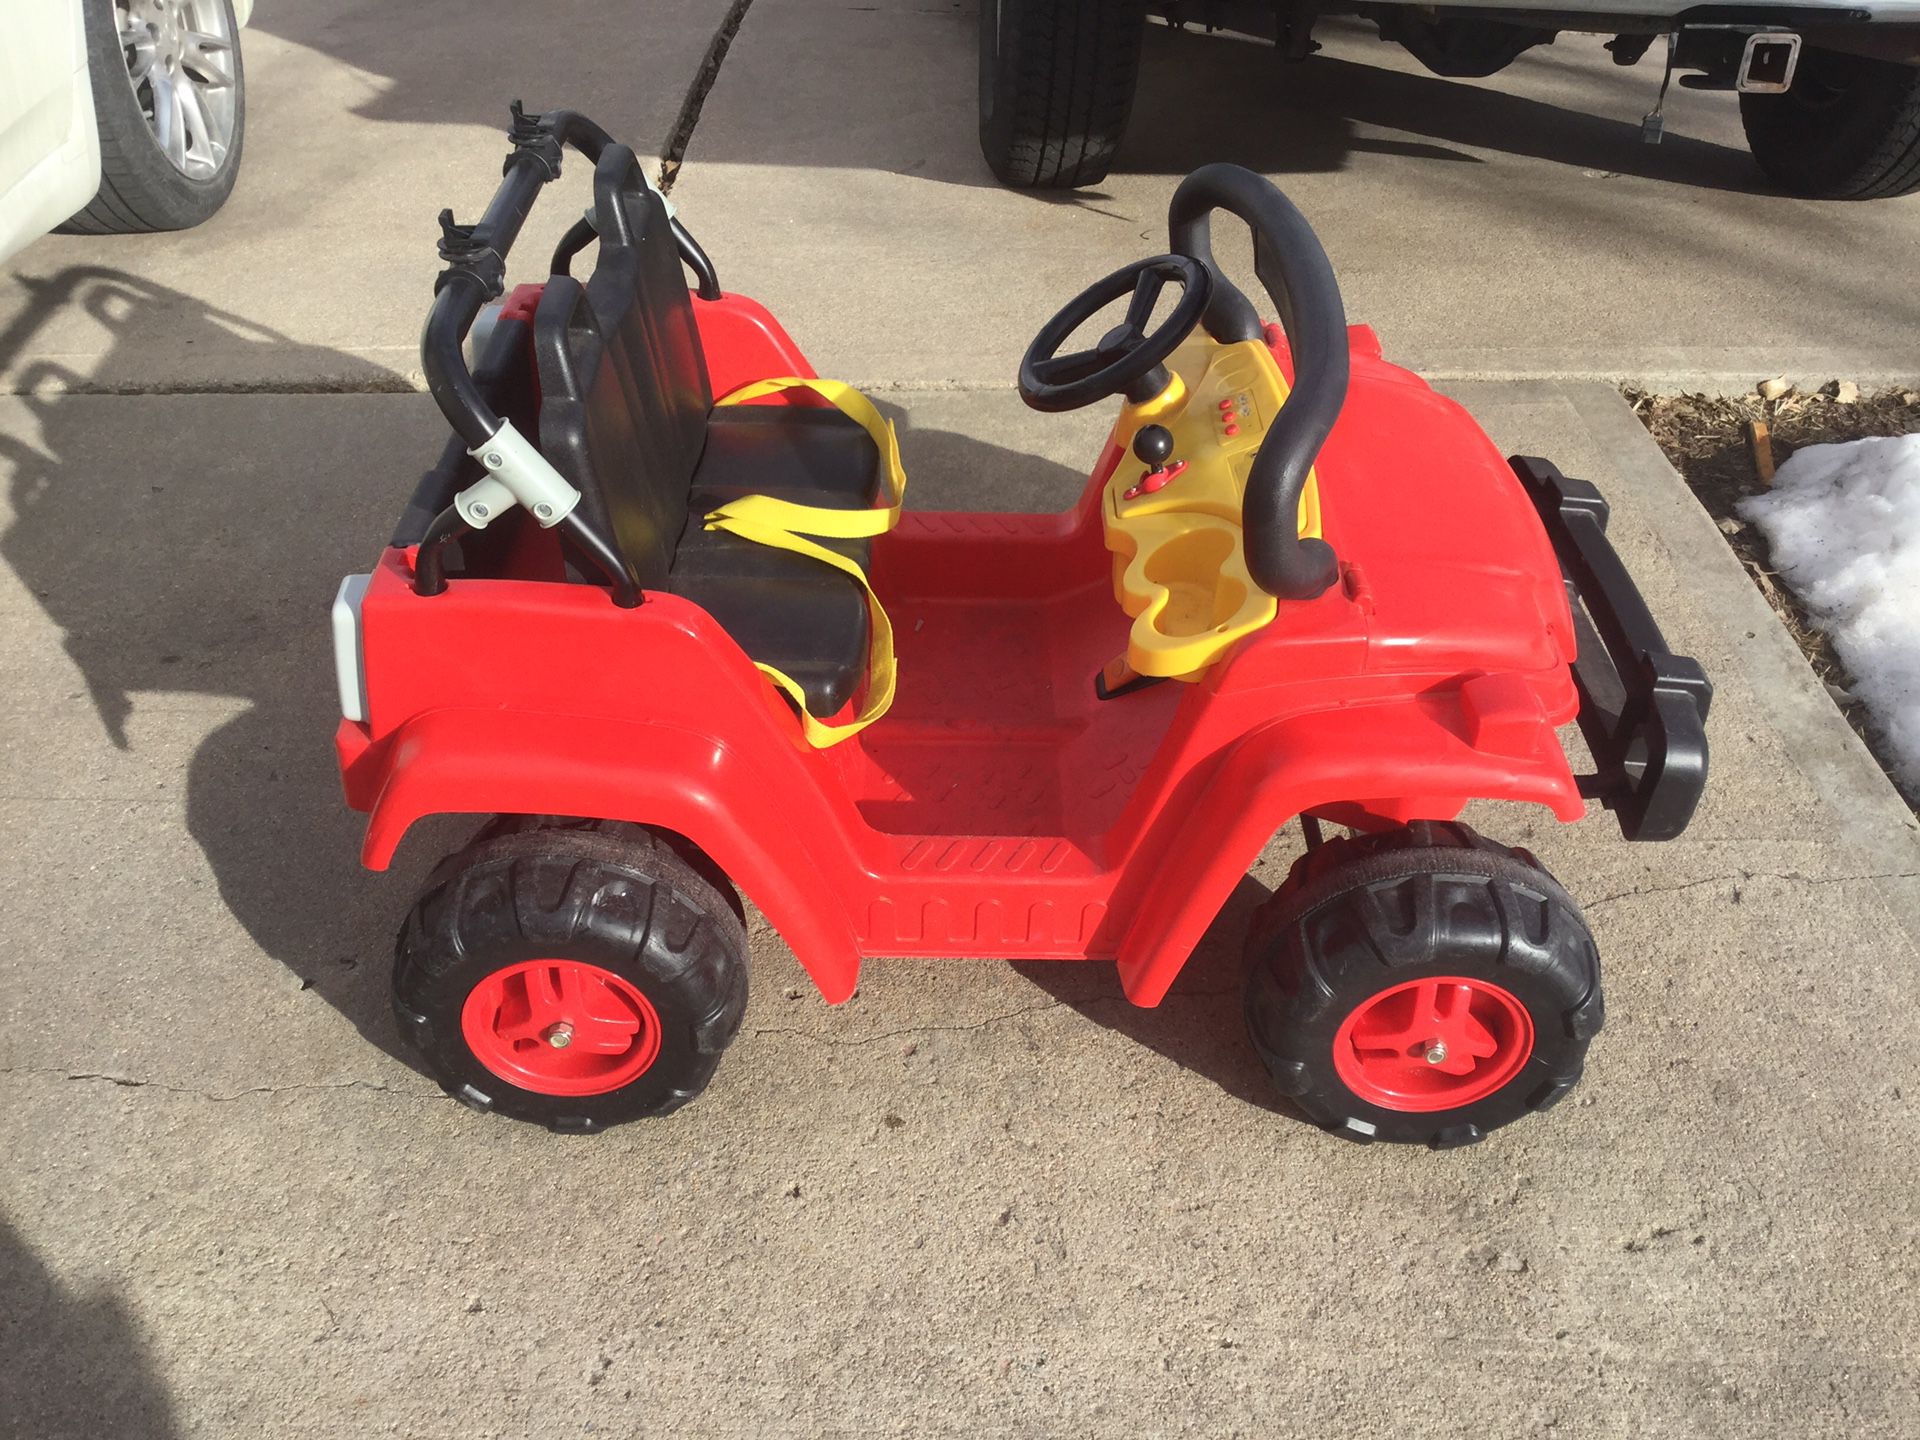 Power Wheels Jeep with a brand new 12 volt battery and charger